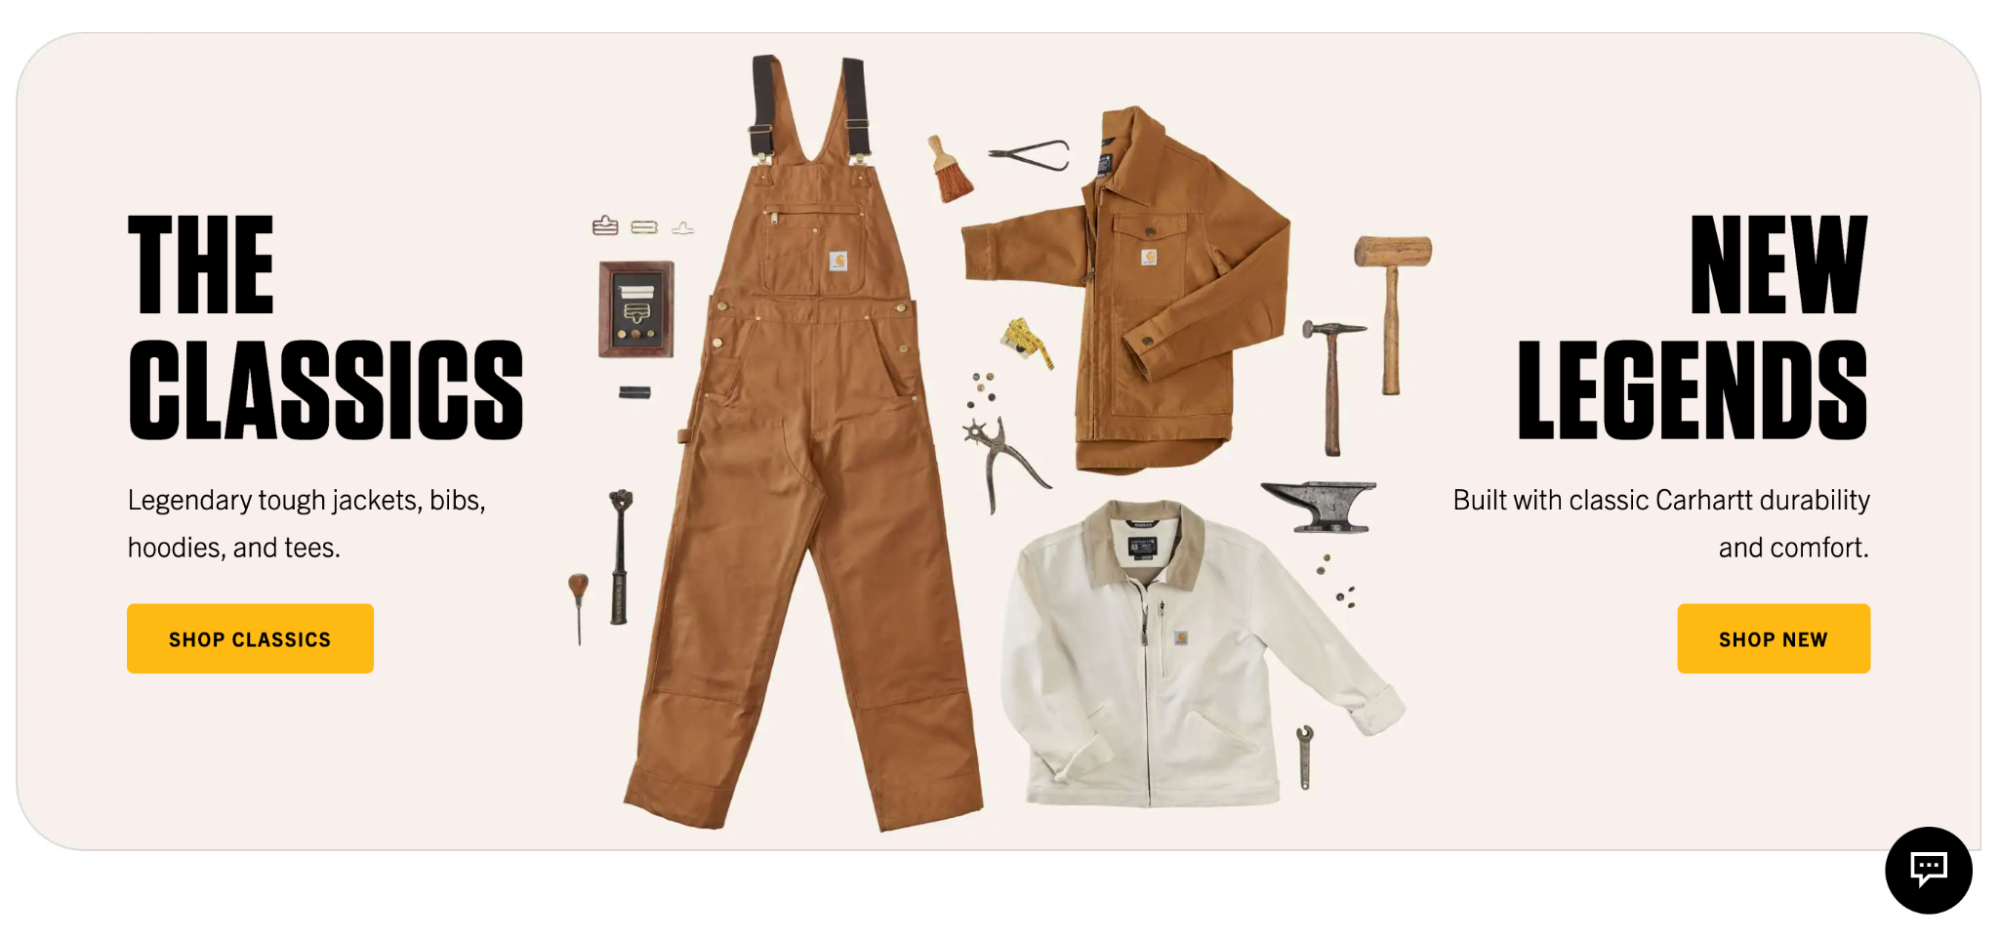 Promotional image from Carhartt homepage. Image of tools alongside work overalls, and jackets. Text overlay says "THE CLASSICS Legendary tough jackets, bibs, hoodies, and tees. SHOP CLASSICS" and "NEW LEGENDS Built with classic Carhartt durability and comfort. SHOP NEW"